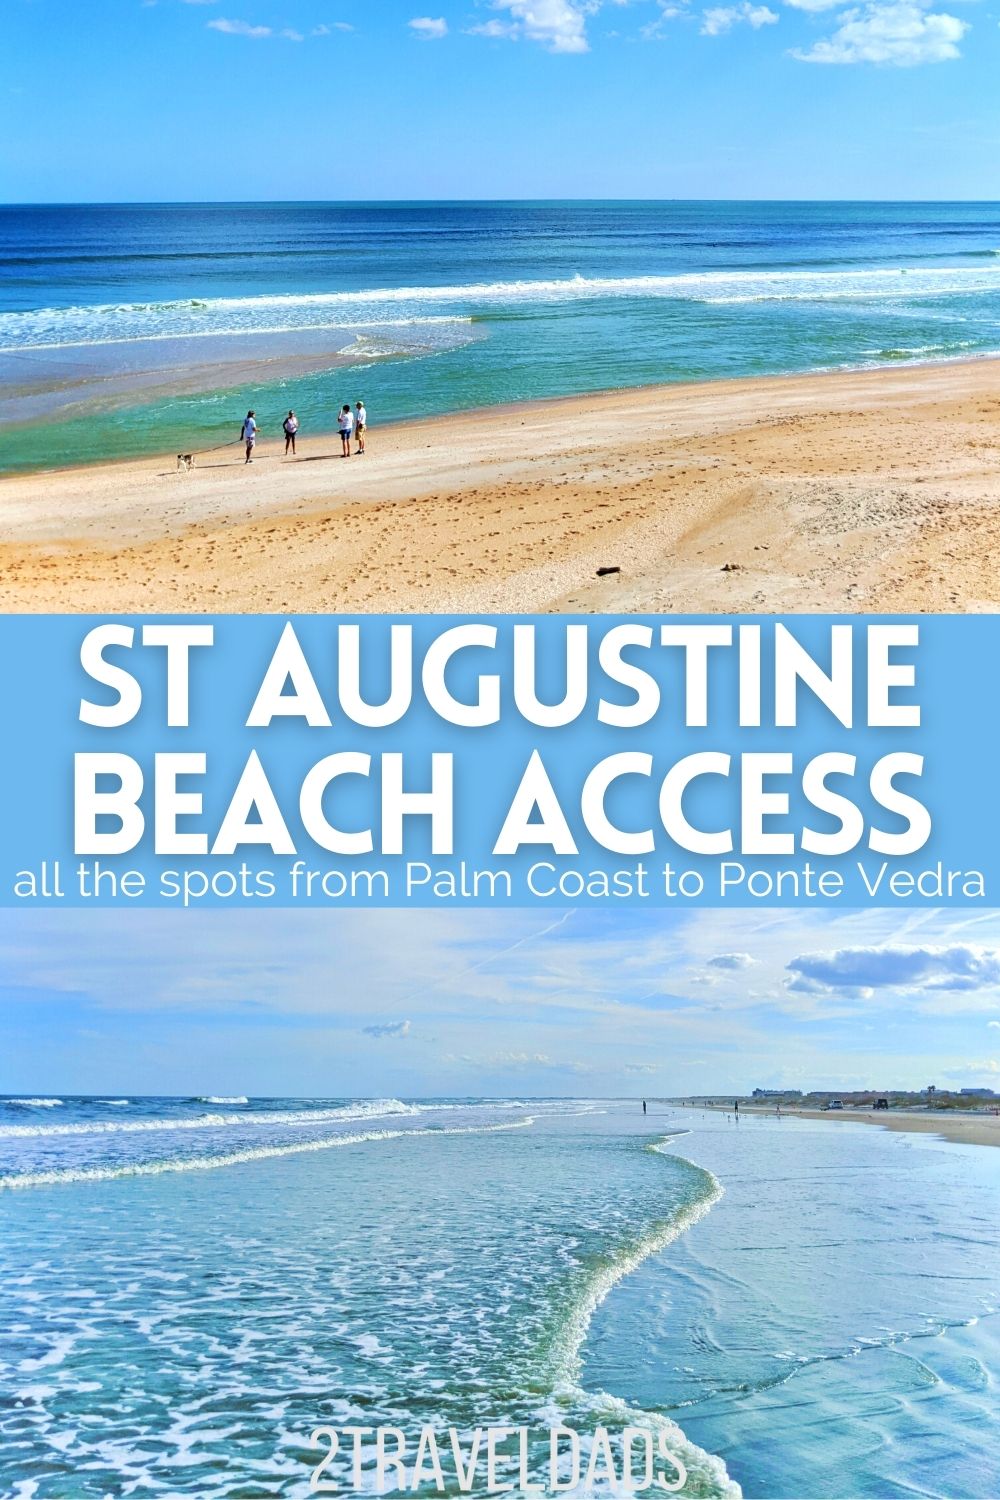 Where can you get onto the beach in the St Augustine, FL area easily? List of beach access points, parking areas and beach boardwalks in St Augustine, St Johns County, Florida from Palm Coast to Ponte Vedra.